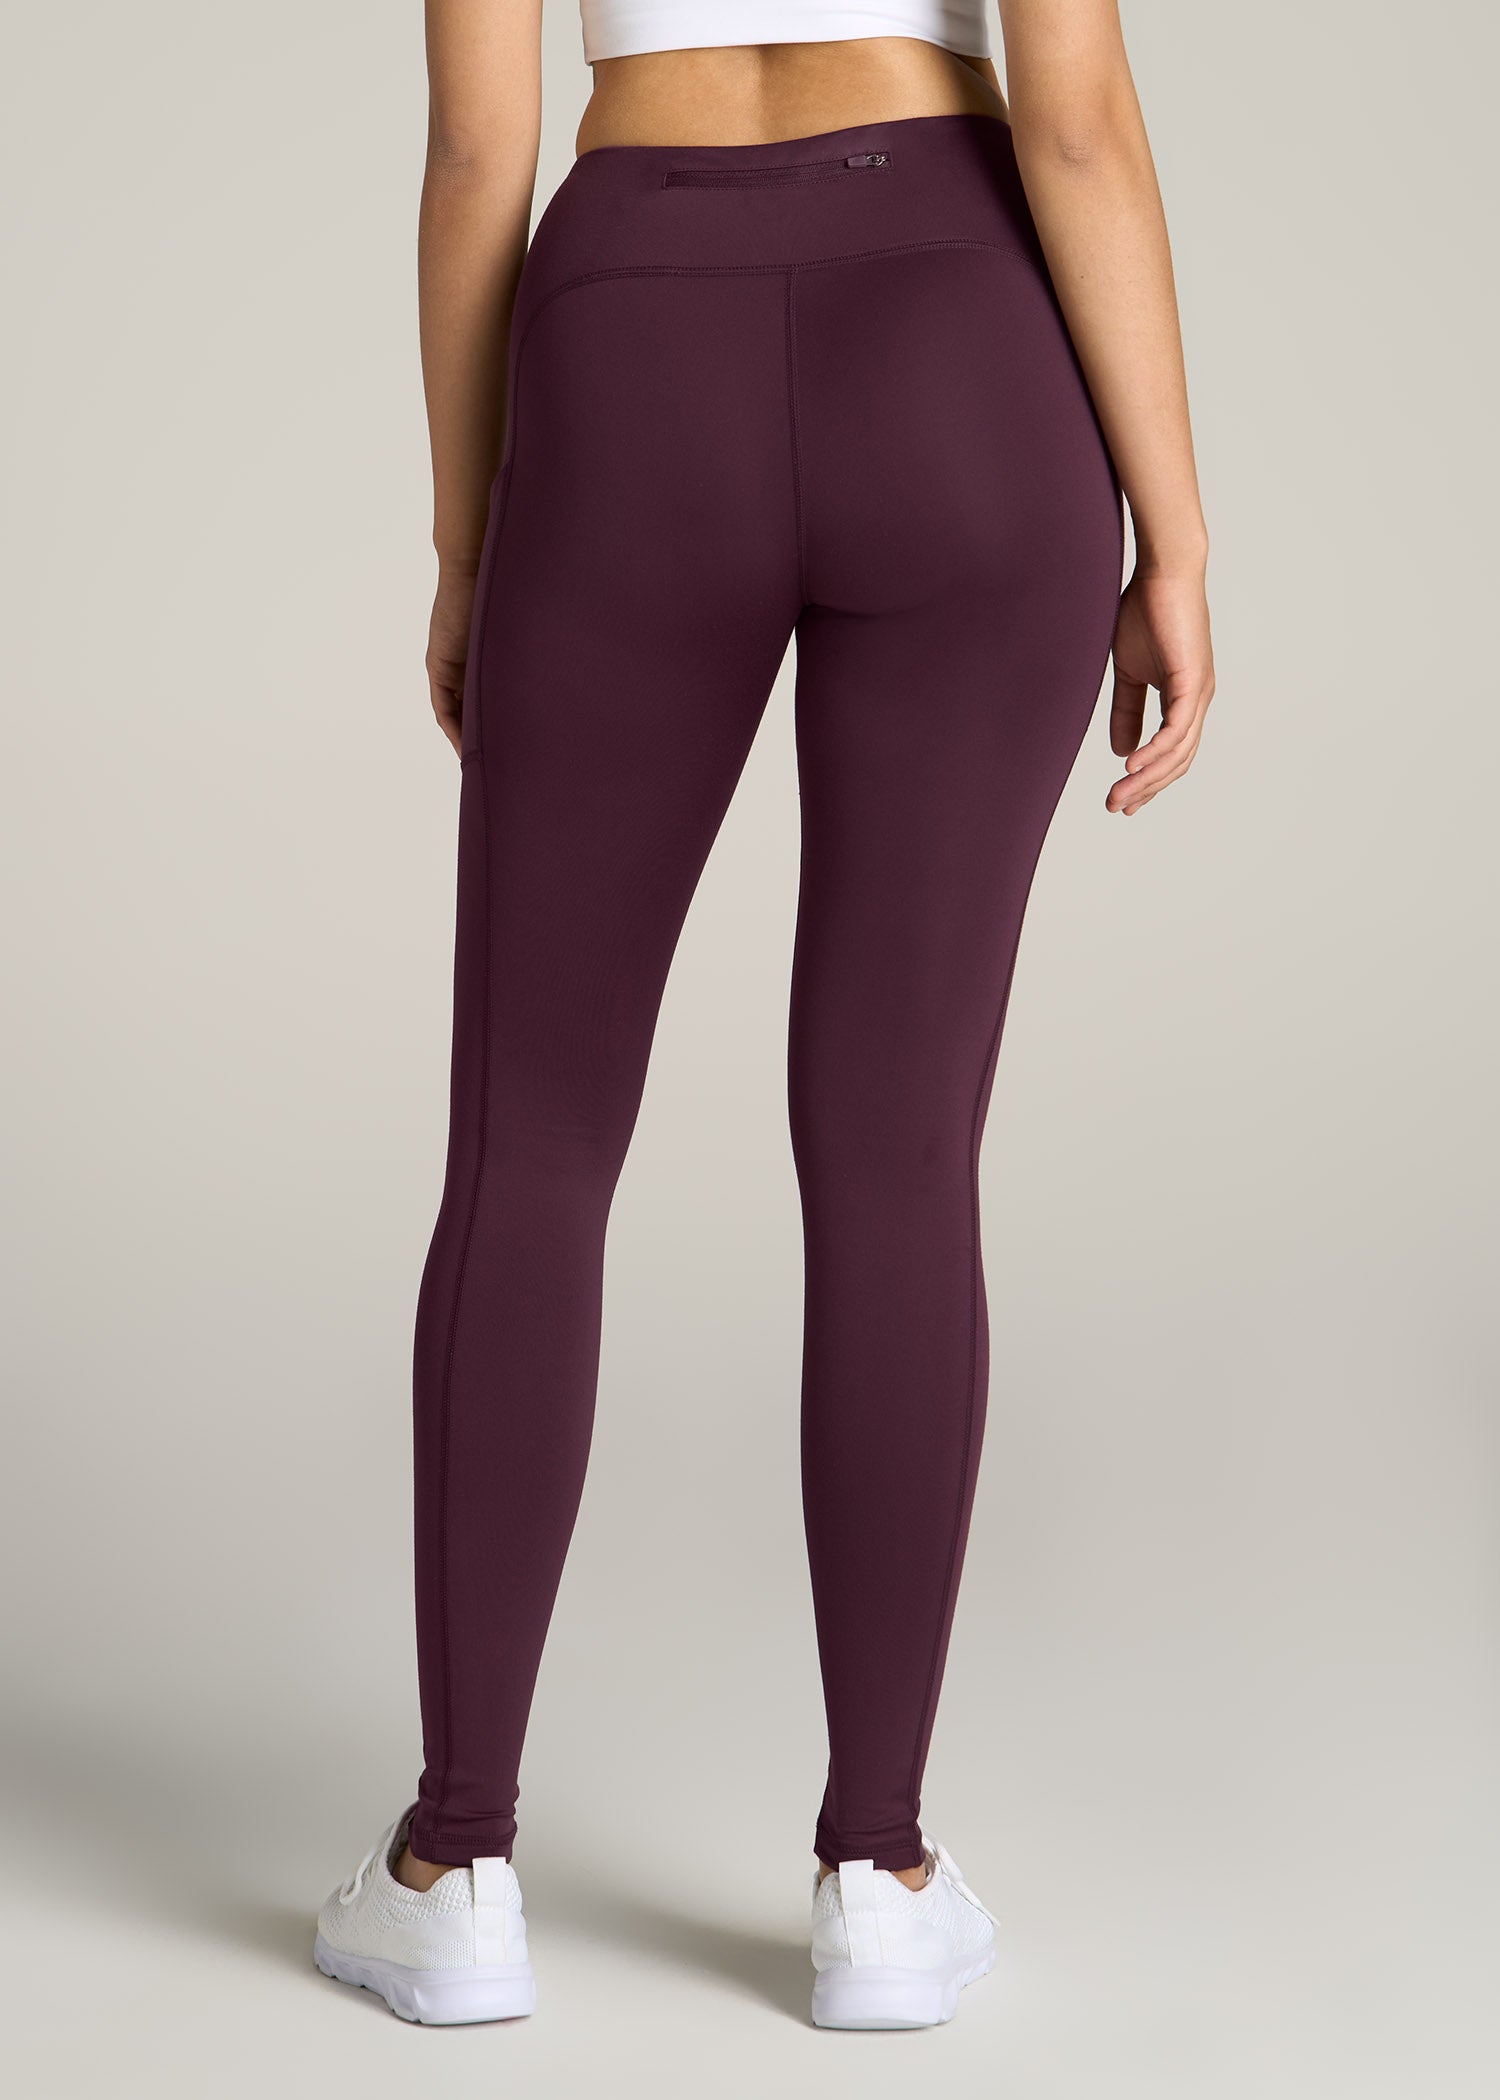 Lavender Leggings with pockets